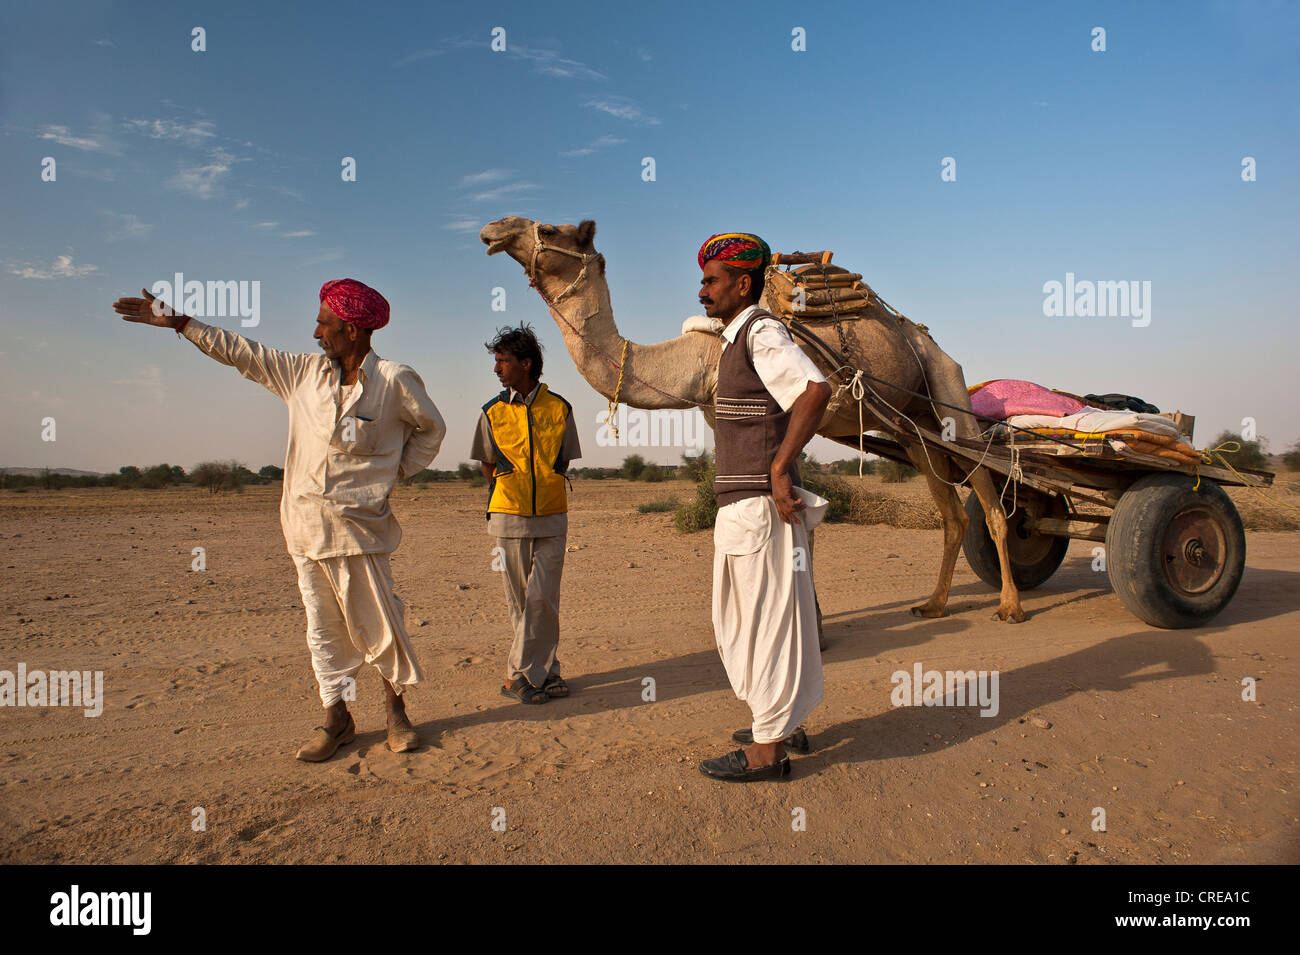 Two Indian men on the move with a camel and a camel cart, asking a local man for the way, Thar Desert, Rajasthan, India, Asia Stock Photo